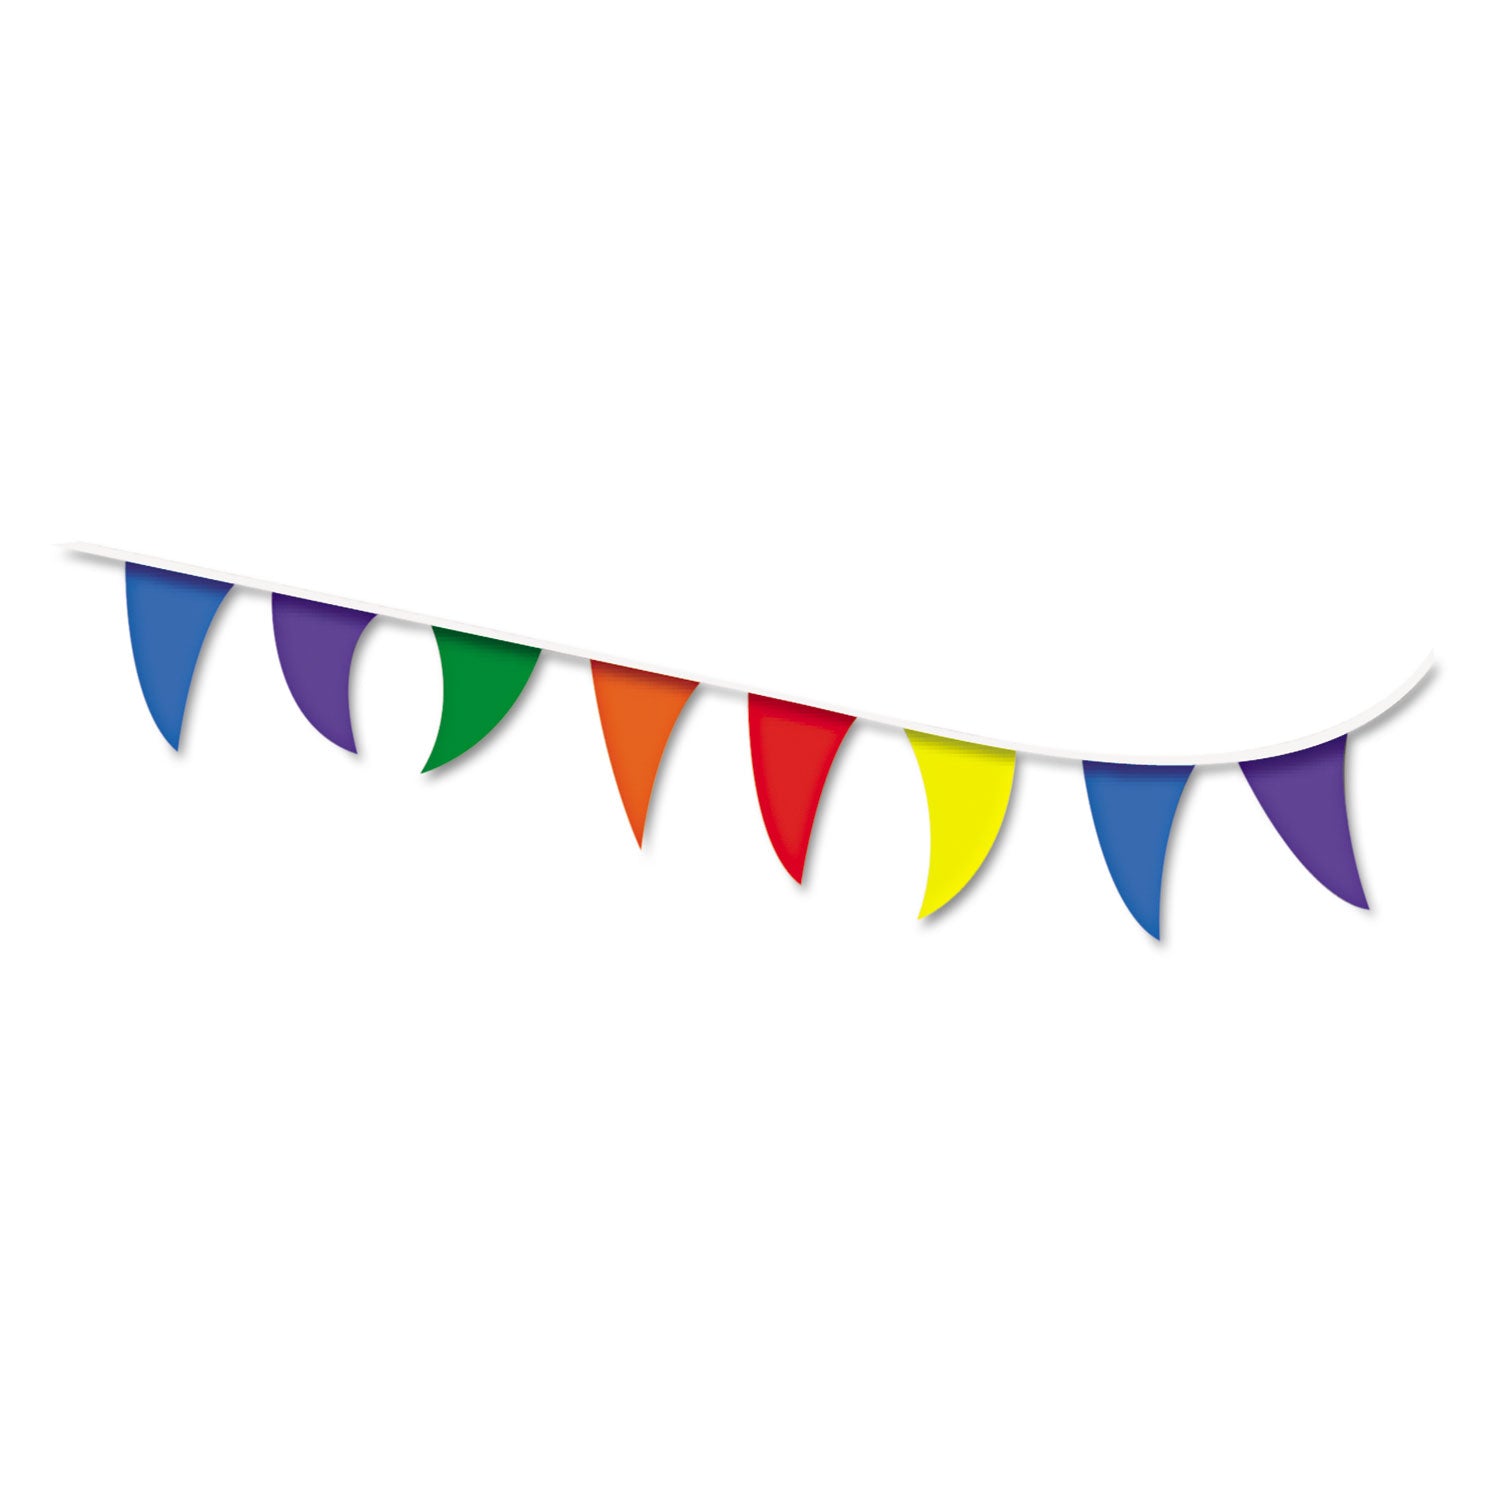 Strung Flags, Pennant, 30 ft, Assorted Bright Colors - 